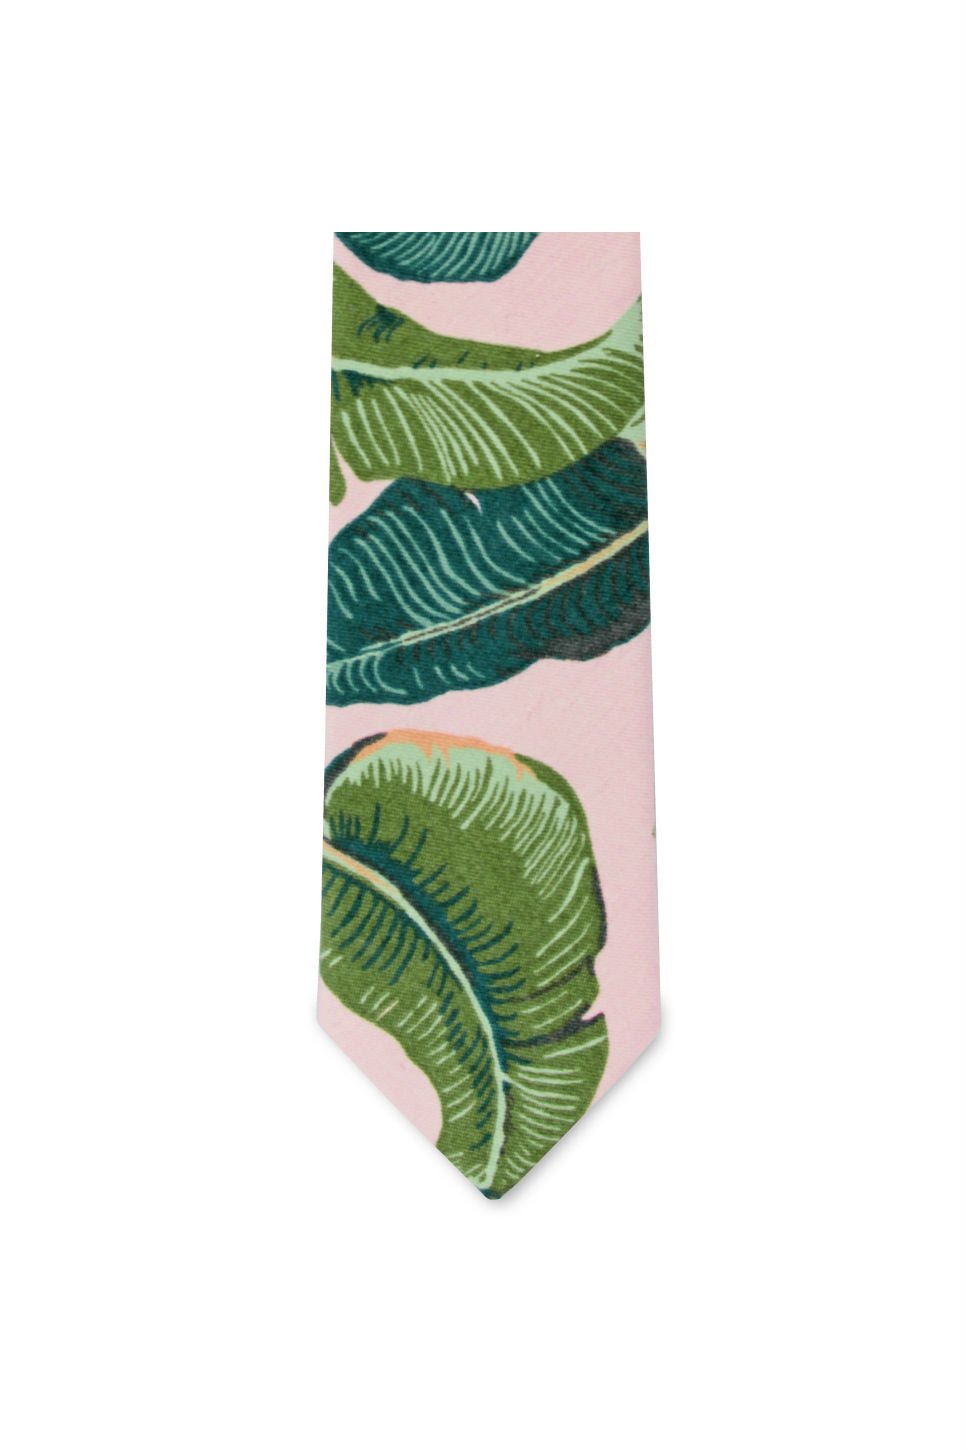 THE BEV PINK TROPICAL TIE Pink and Green